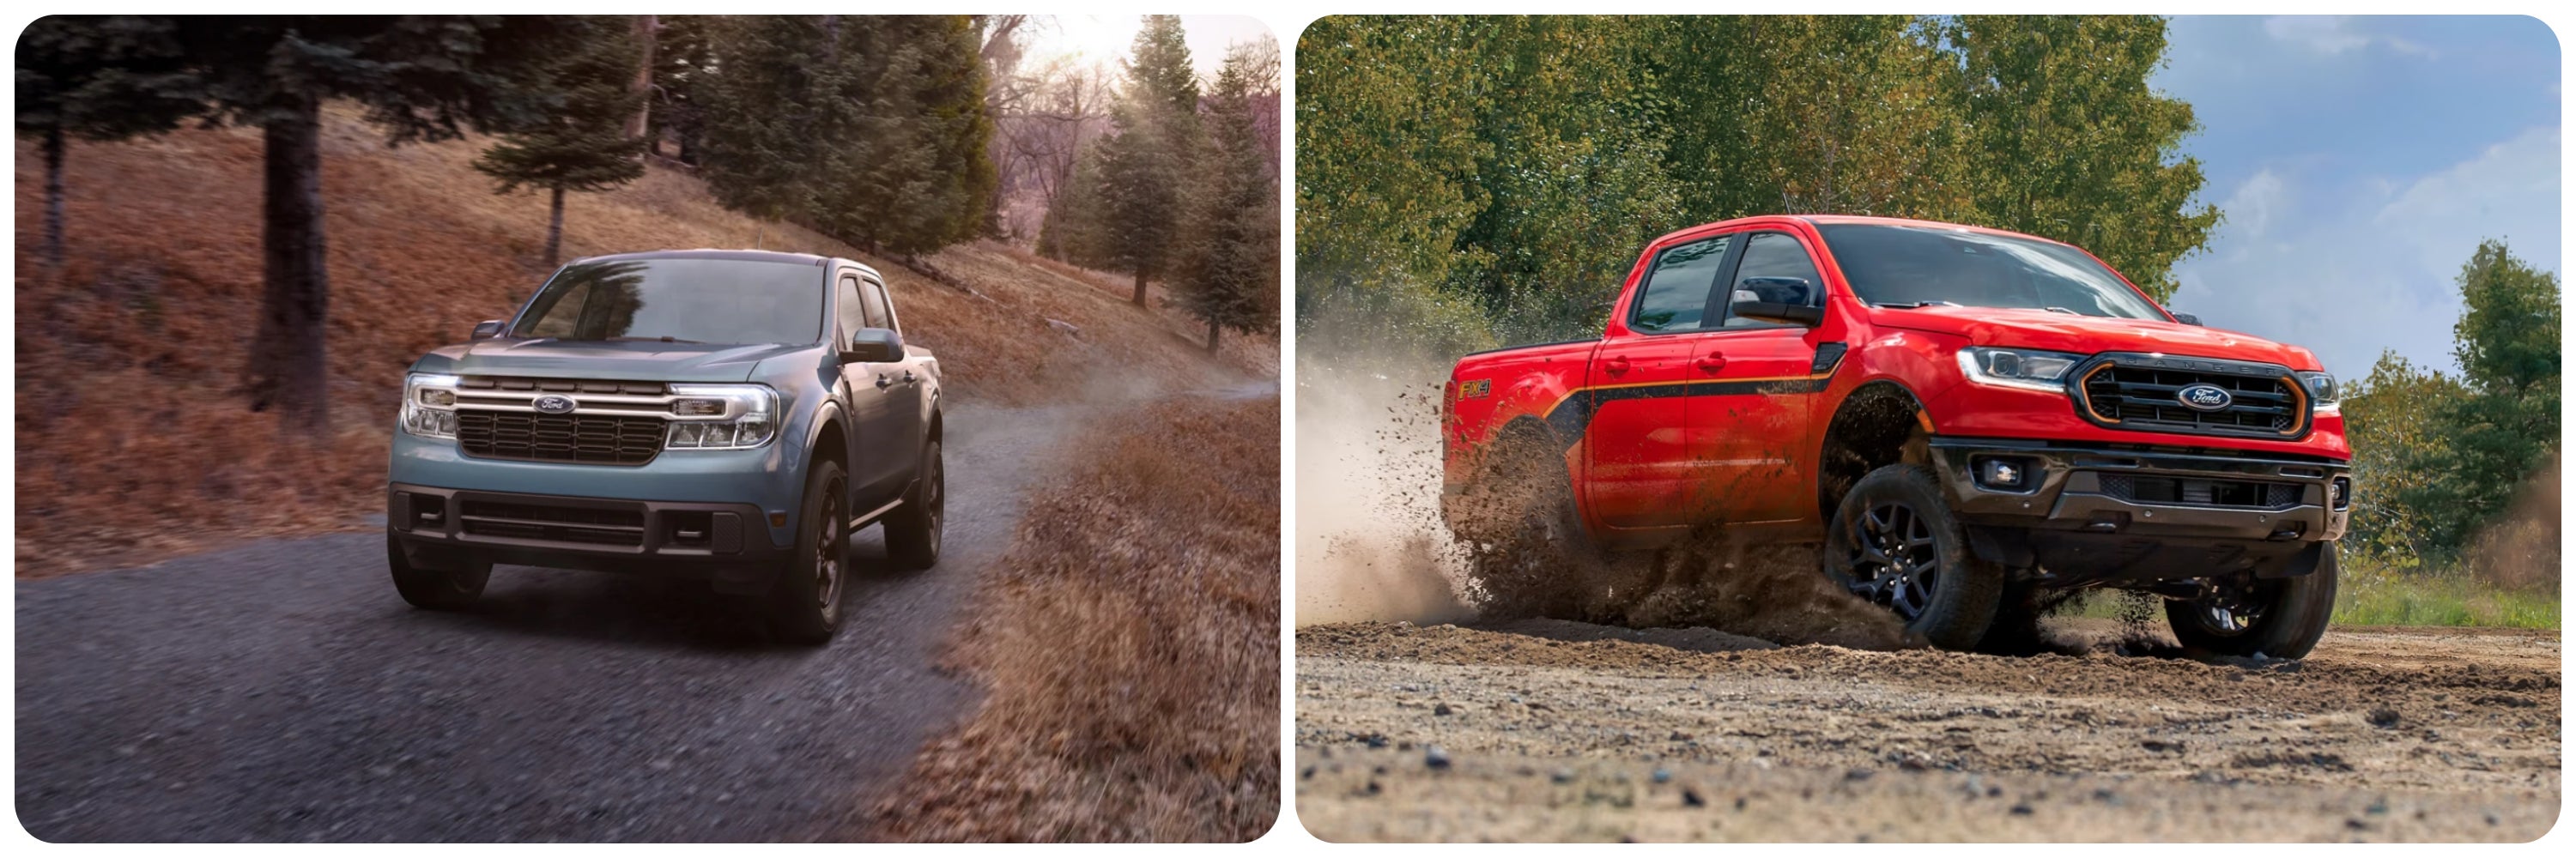 On the left a front view of the 2023 Ford Maverick, on the right a view of a red 2023 Ford Ranger